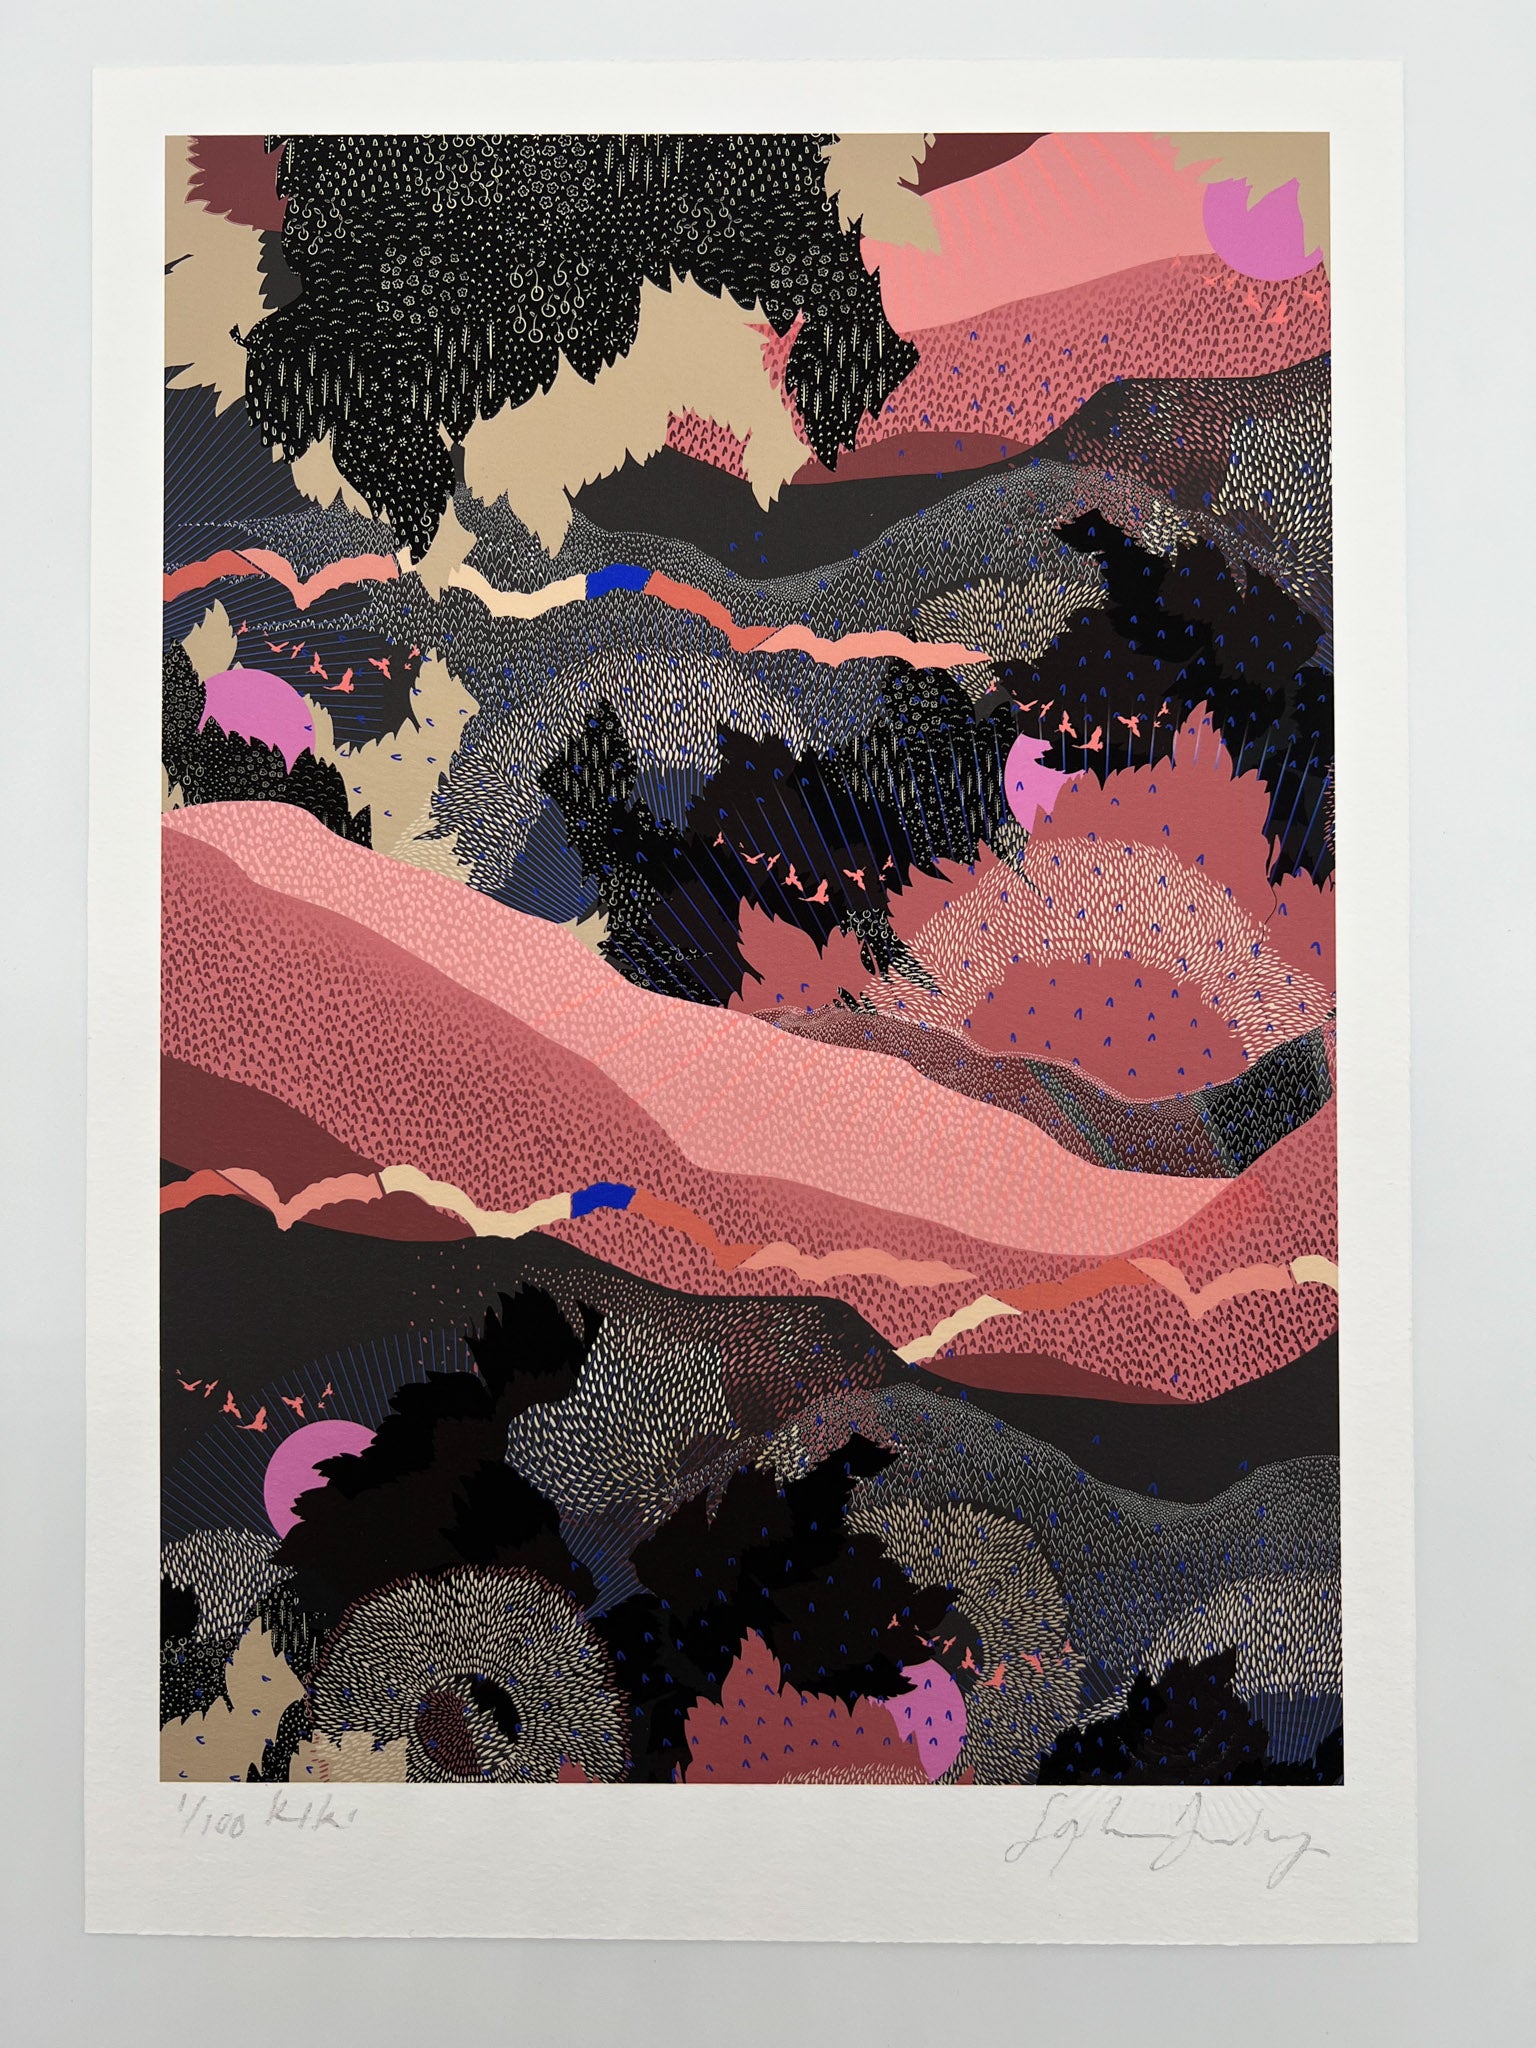 A giclee print in black and pink with a landscape design and bright pink suns